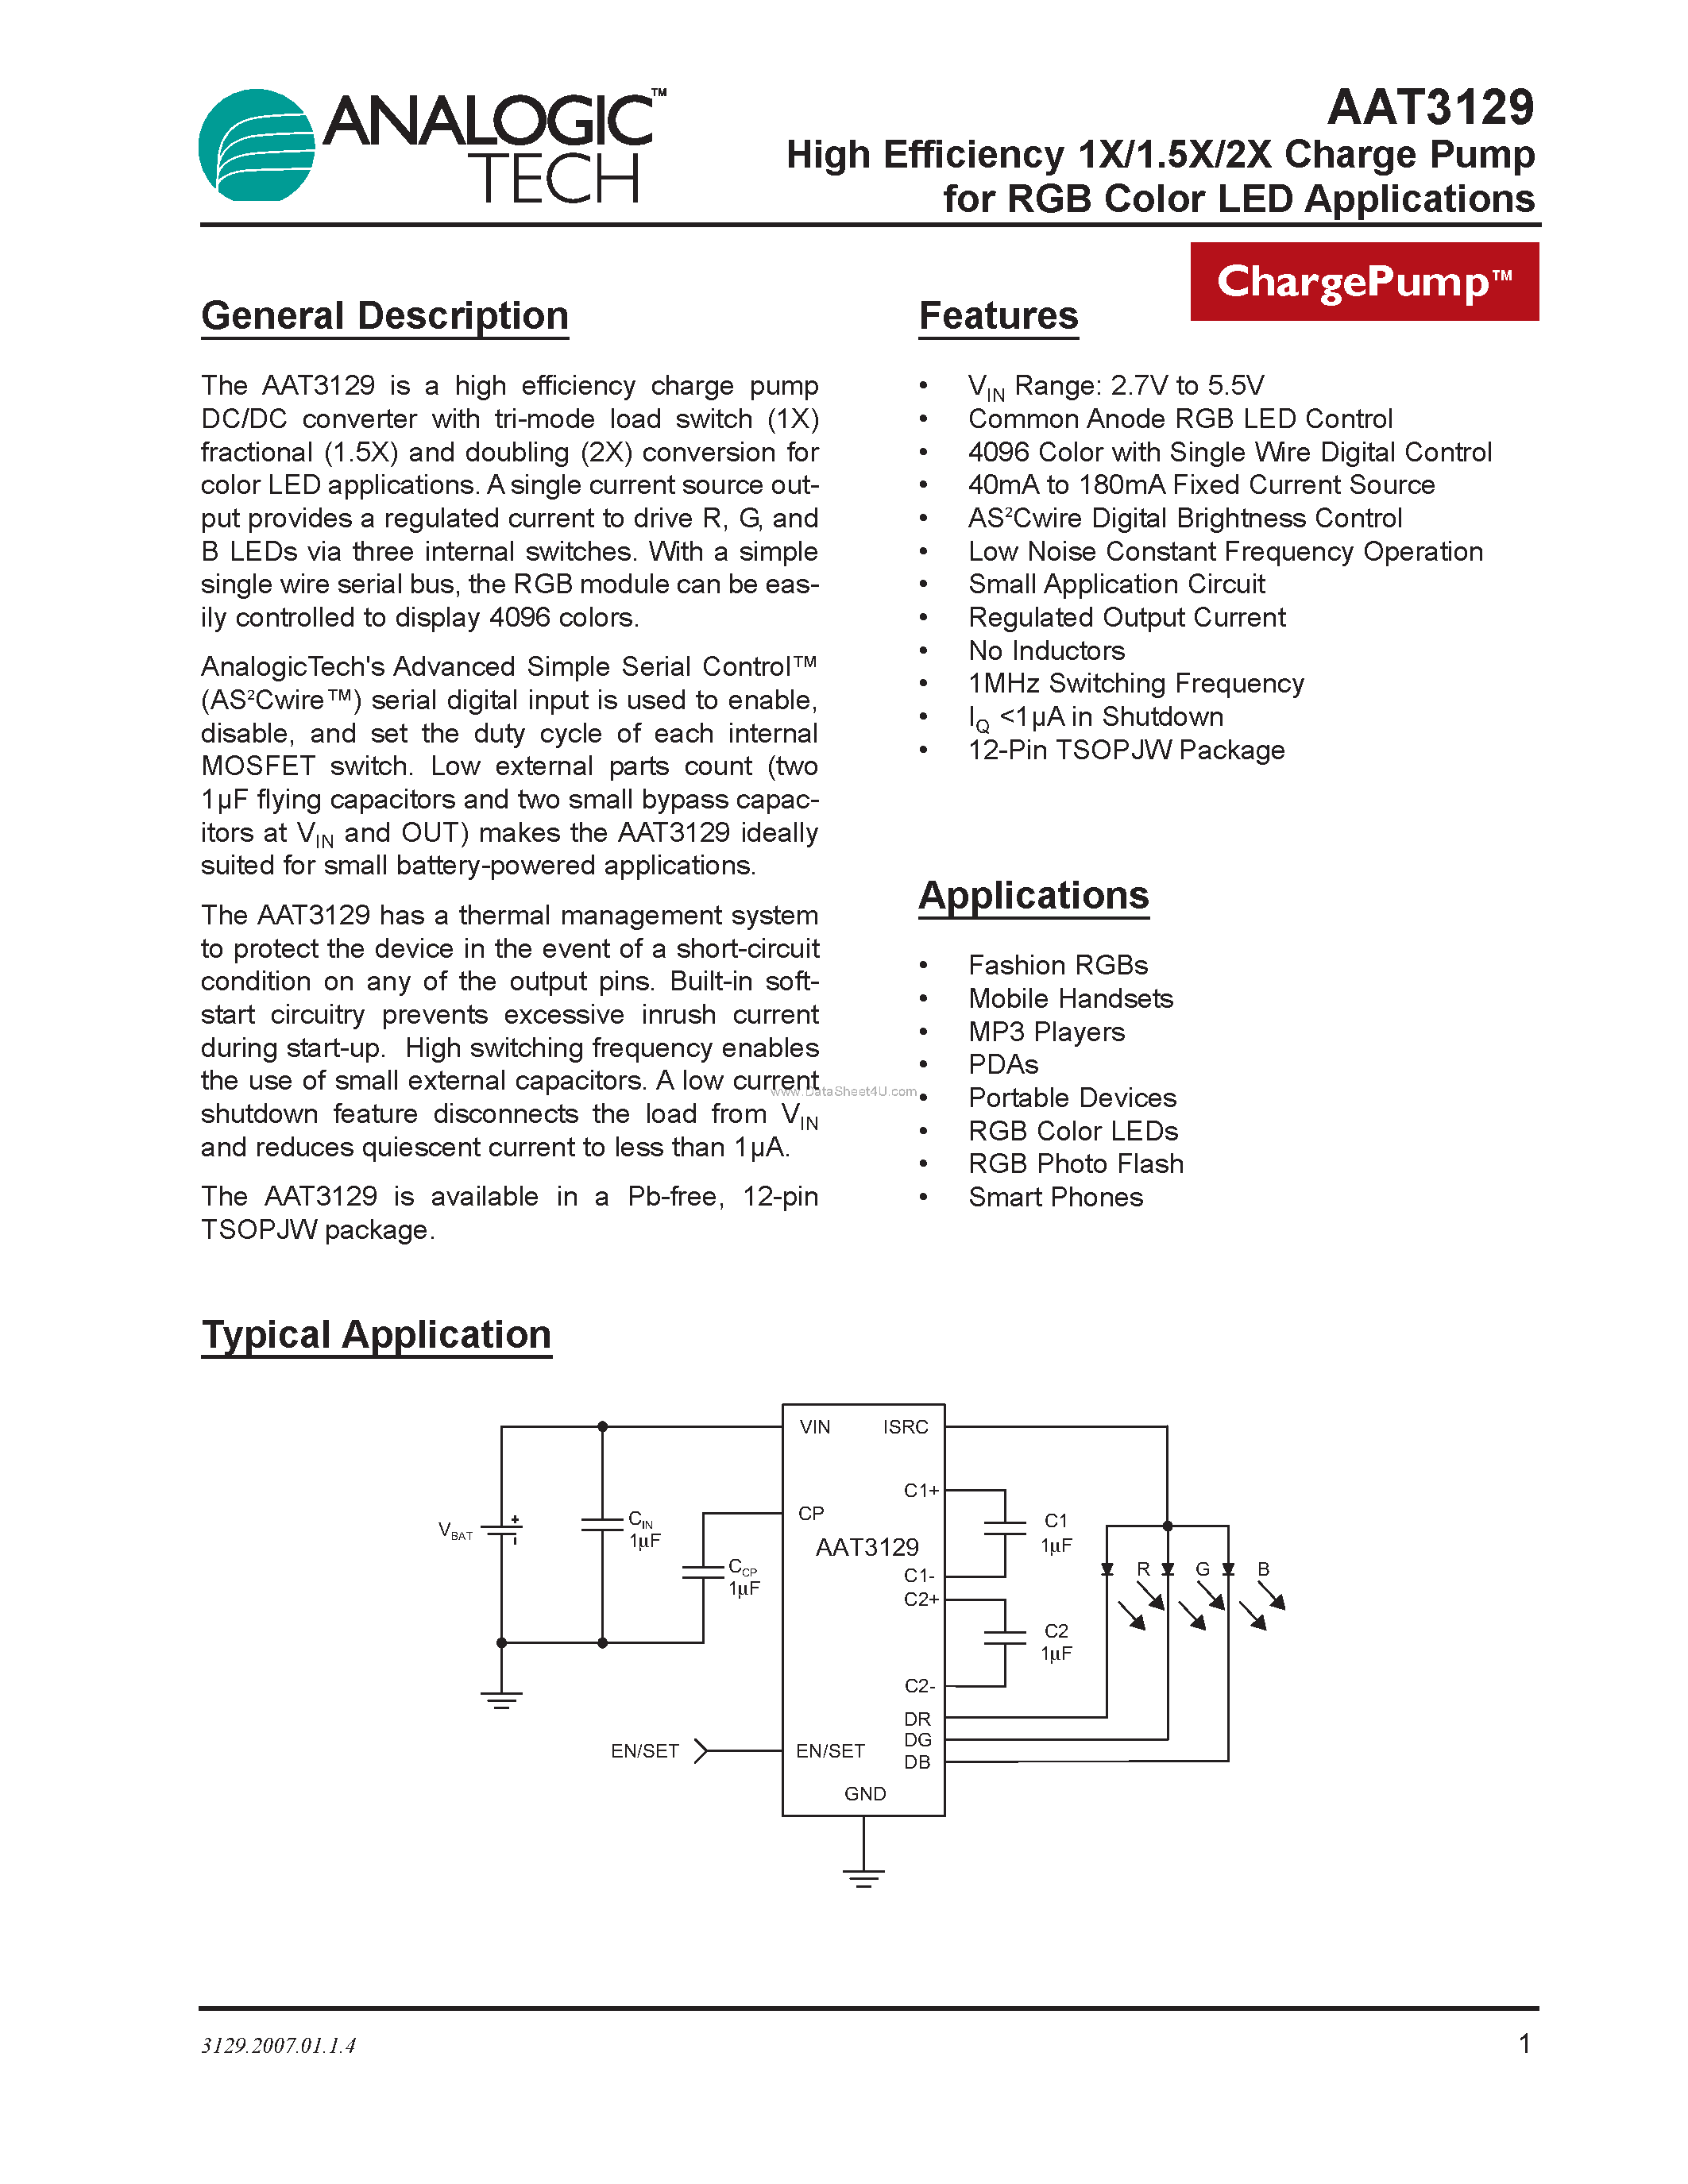 Datasheet AAT3129 - High Efficiency 1X/1.5X/2X Charge Pump page 1